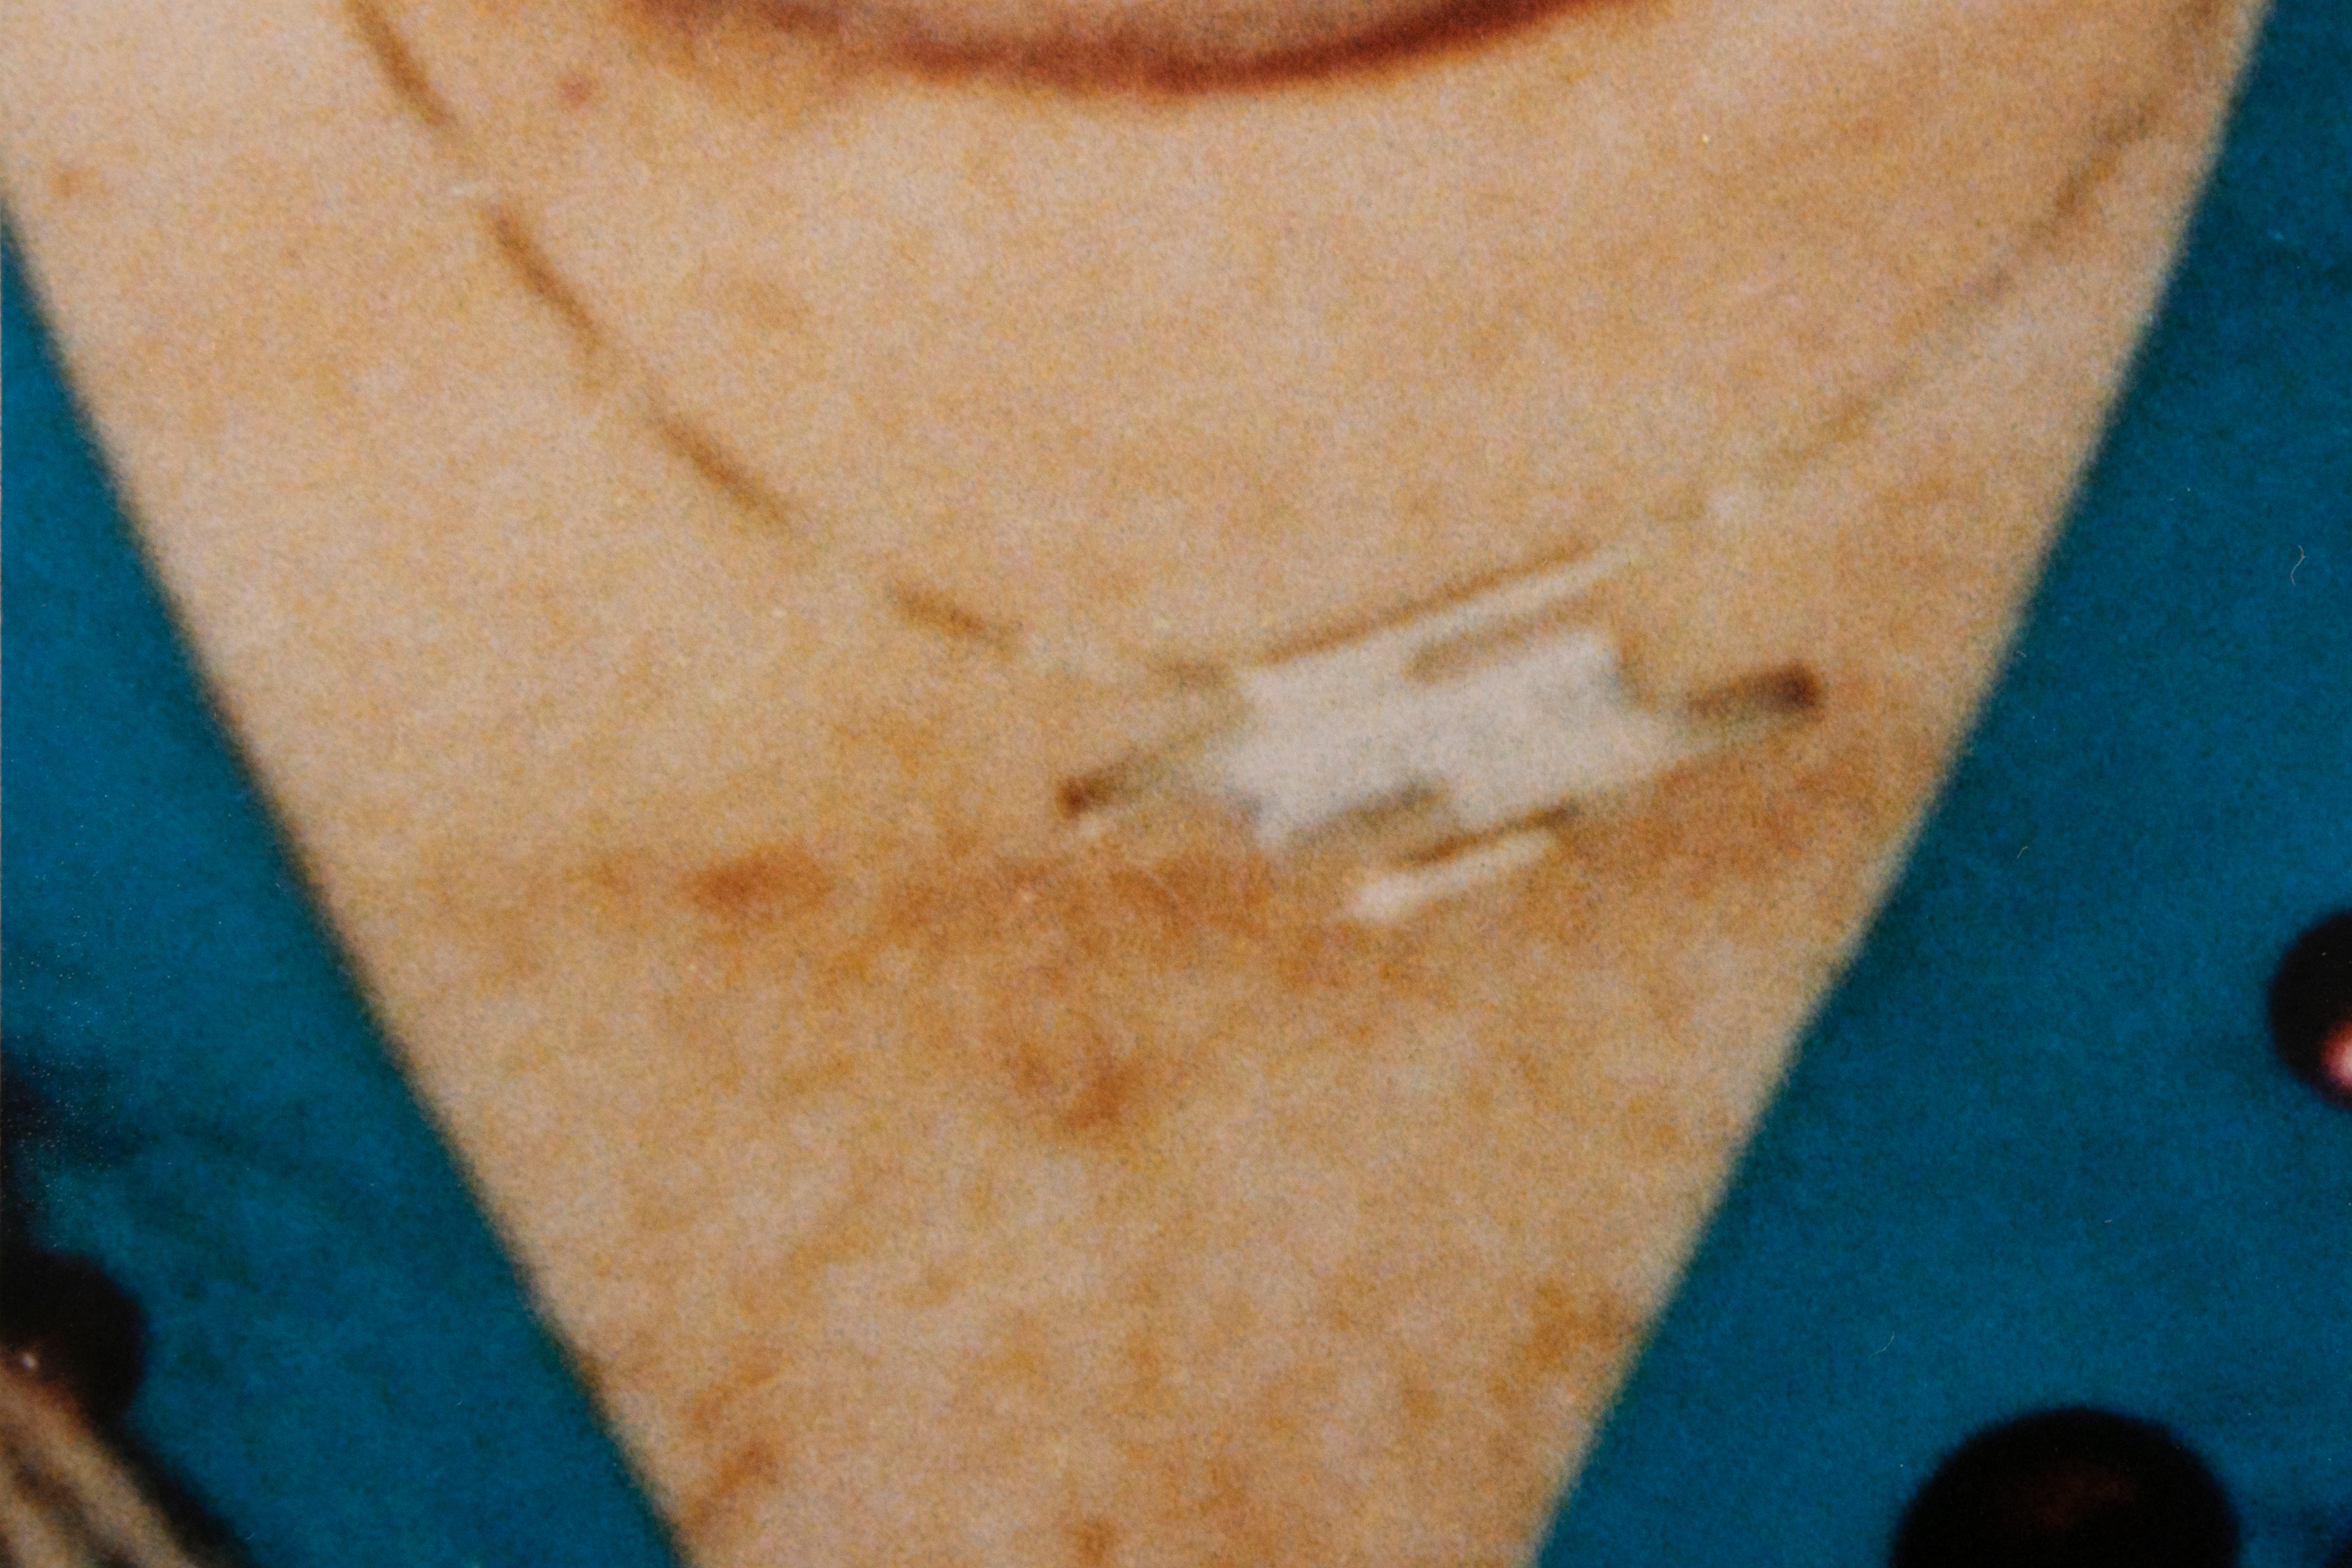 An evidence photo from police files that shows Rhoda Nathan wearing her necklace that was later a key piece of evidence in her case. The pendent was missing and later located in Elwood JonesÕs tool box. 